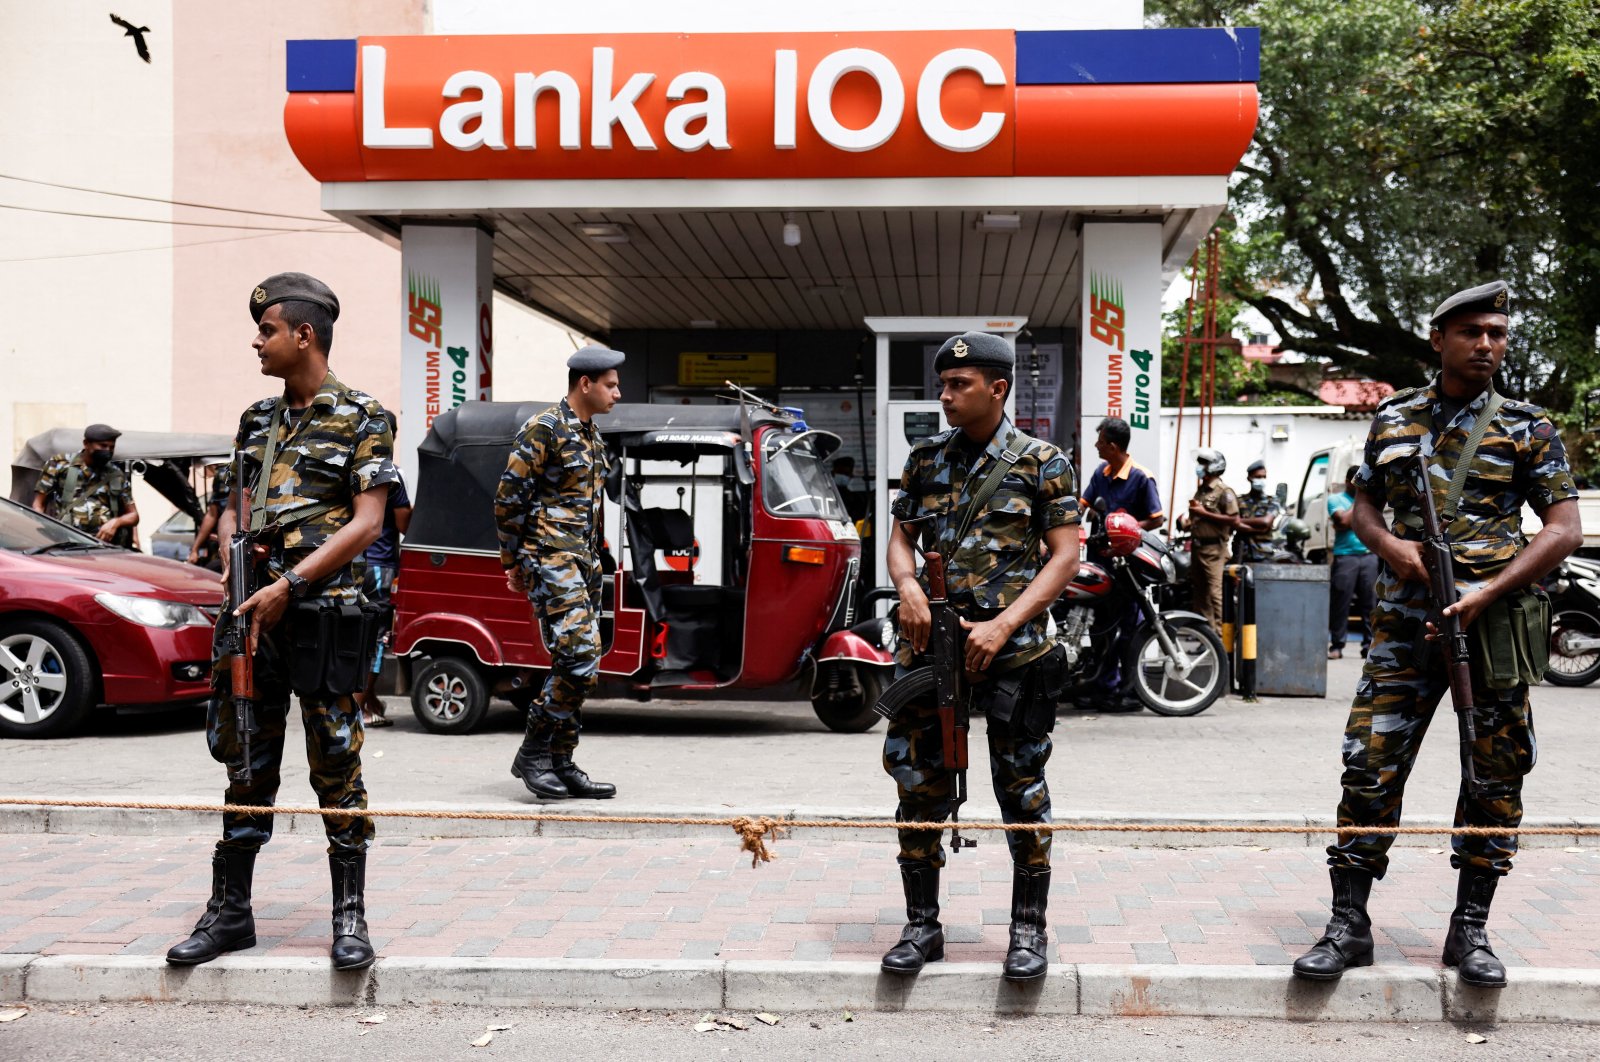 Air force members stand guard at a Lanka IOC fuel station (Indian Oil Corporation) as people queue up to buy fuel due to fuel shortage, amid the country&#039;s economic crisis, in Colombo, Sri Lanka, July 6, 2022. (Reuters Photo)